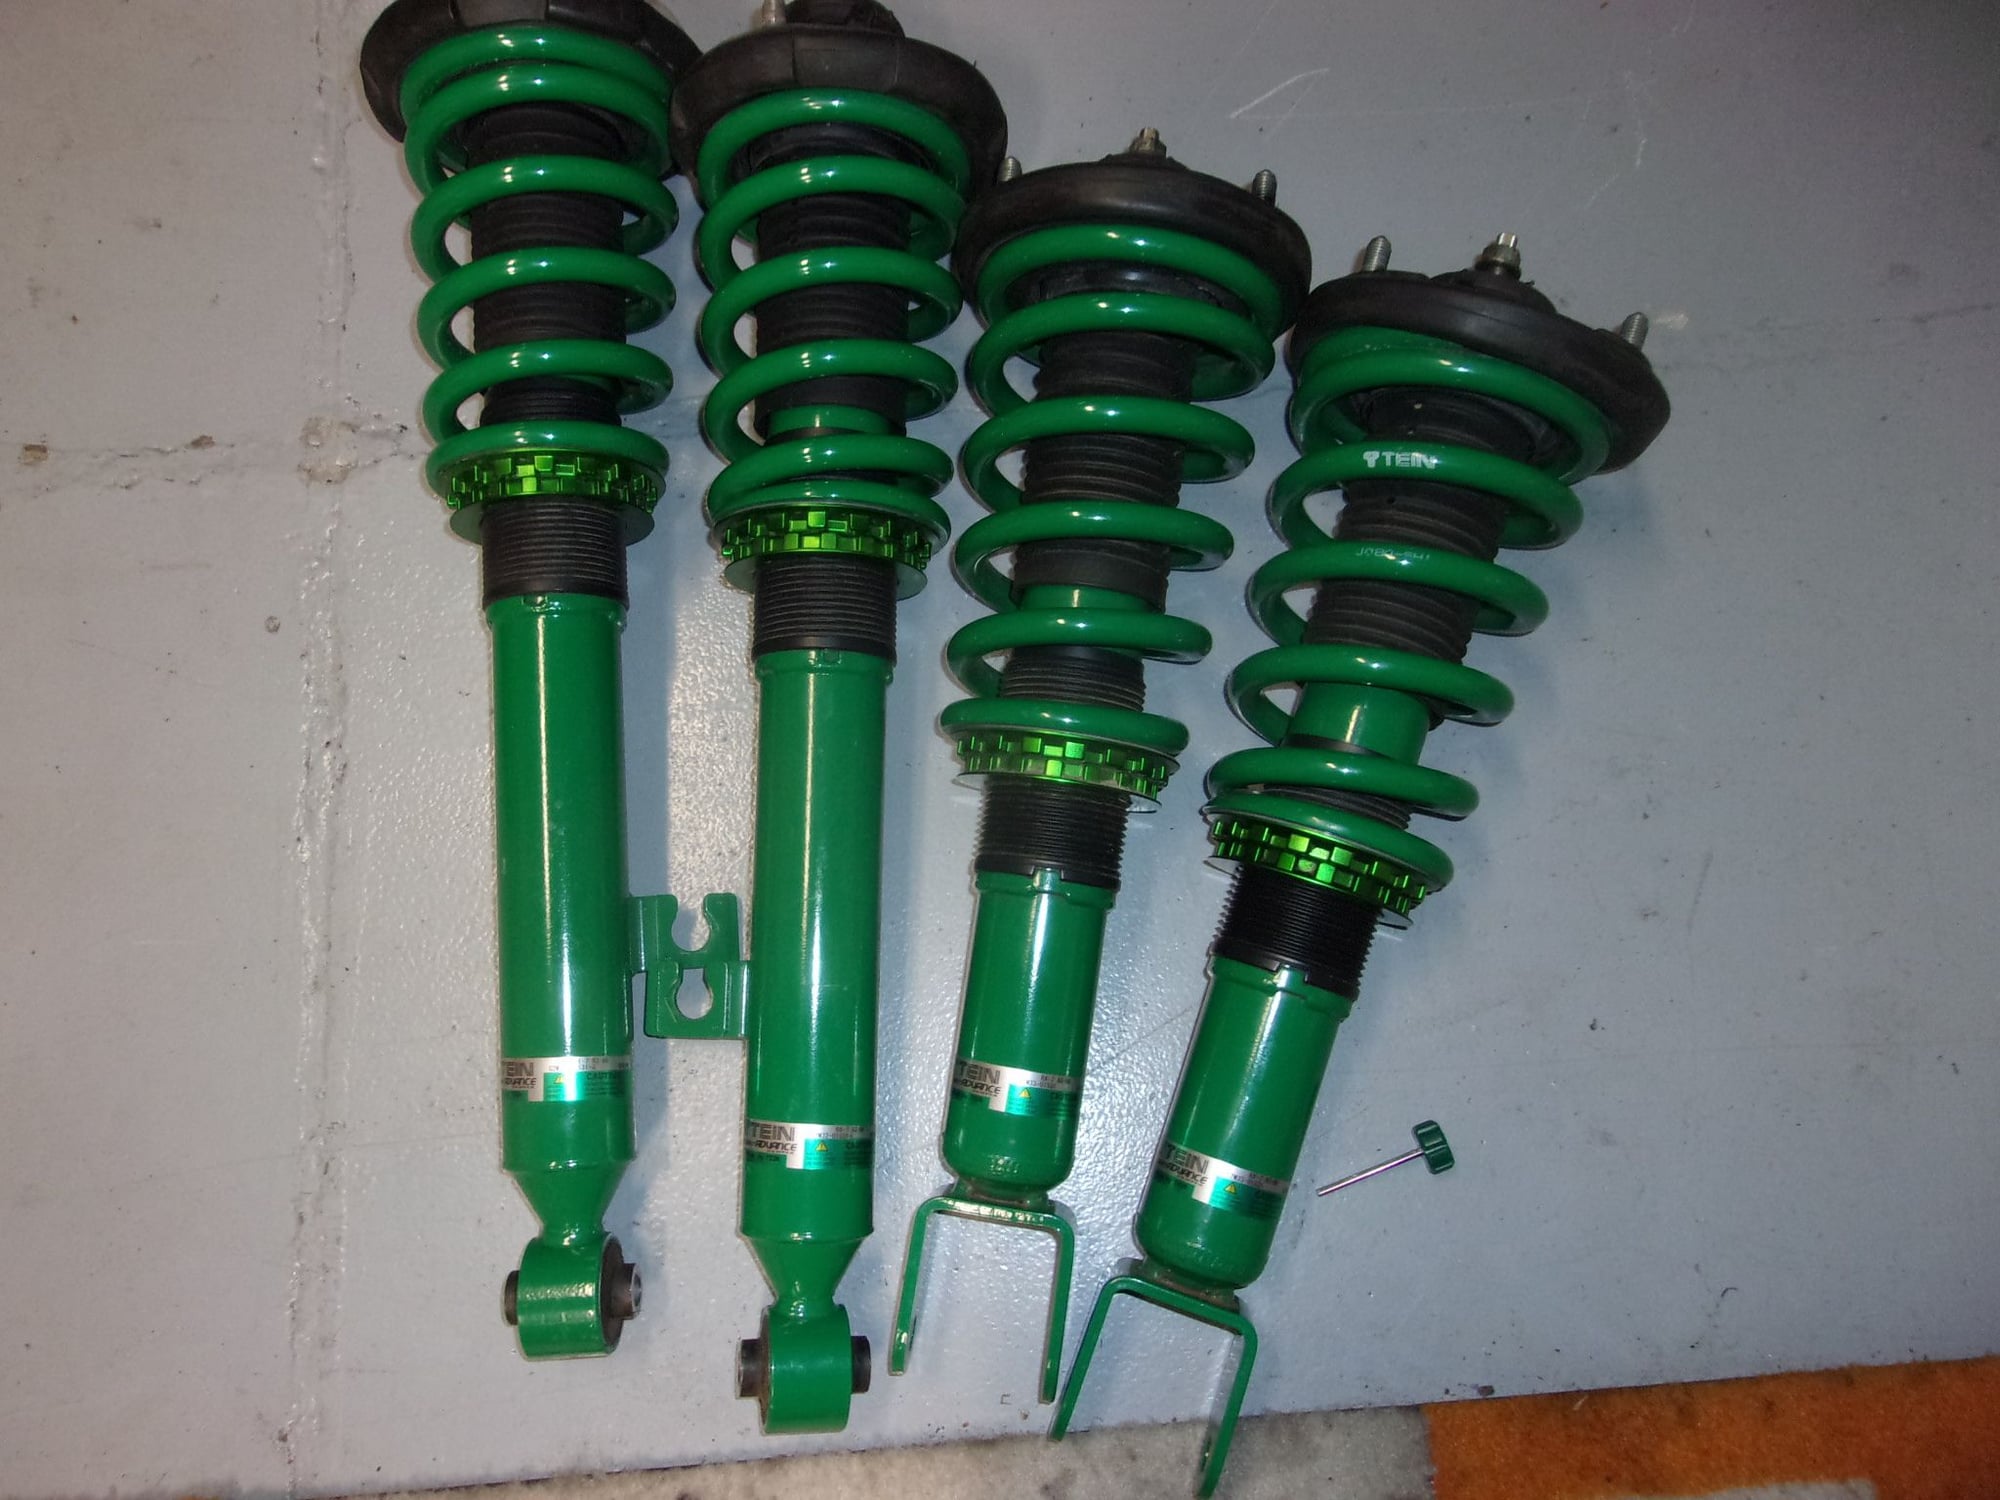 Steering/Suspension - Tein Street Advance coil-overs - Used - 1993 to 2002 Mazda RX-7 - Murfreesboro, TN 37130, United States